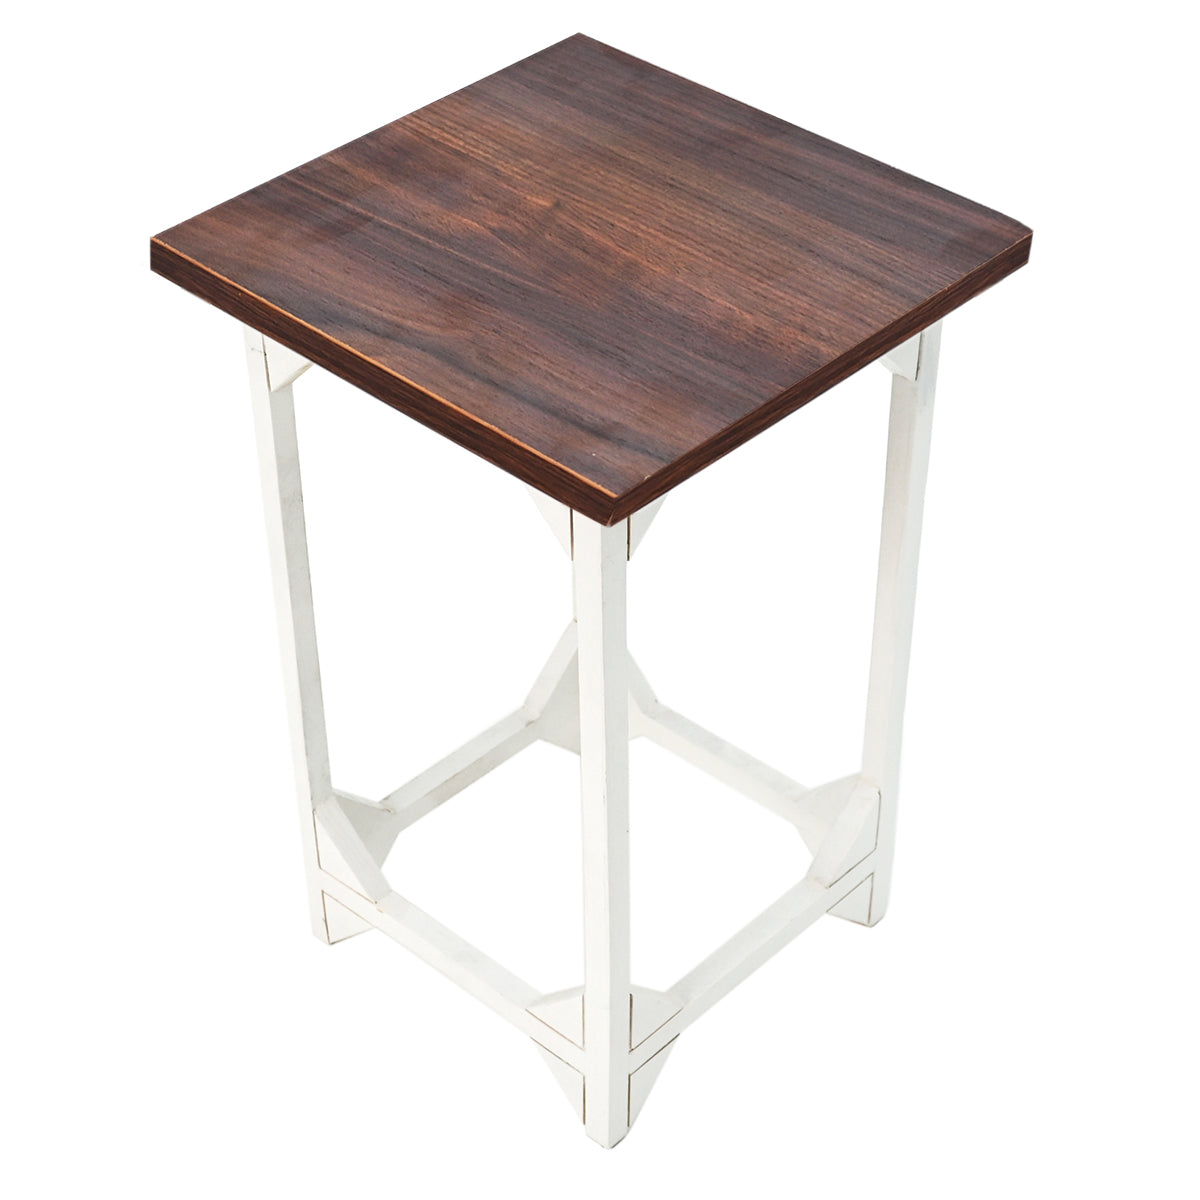 Ditmas (White) Side Table